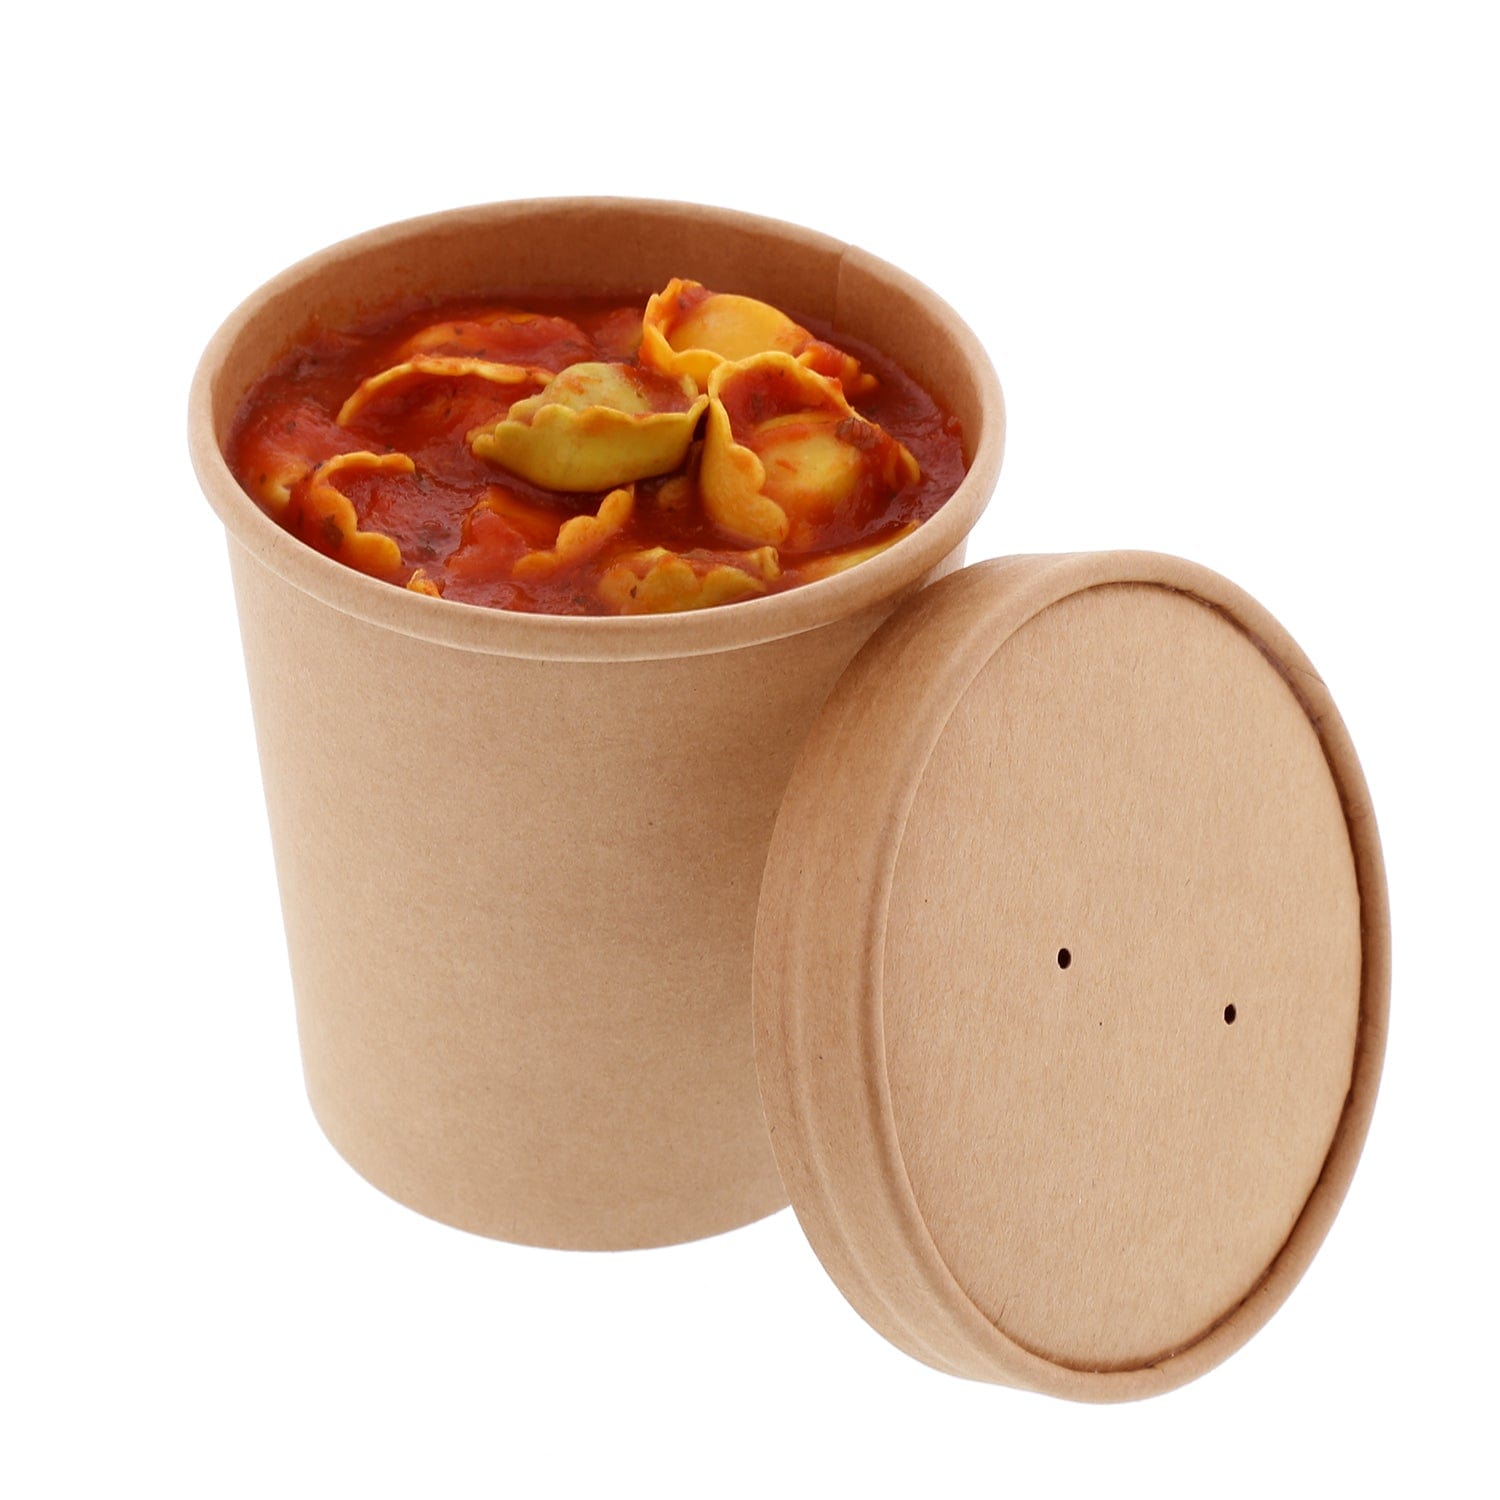 16 oz disposable food packaging paper soup bowl samples